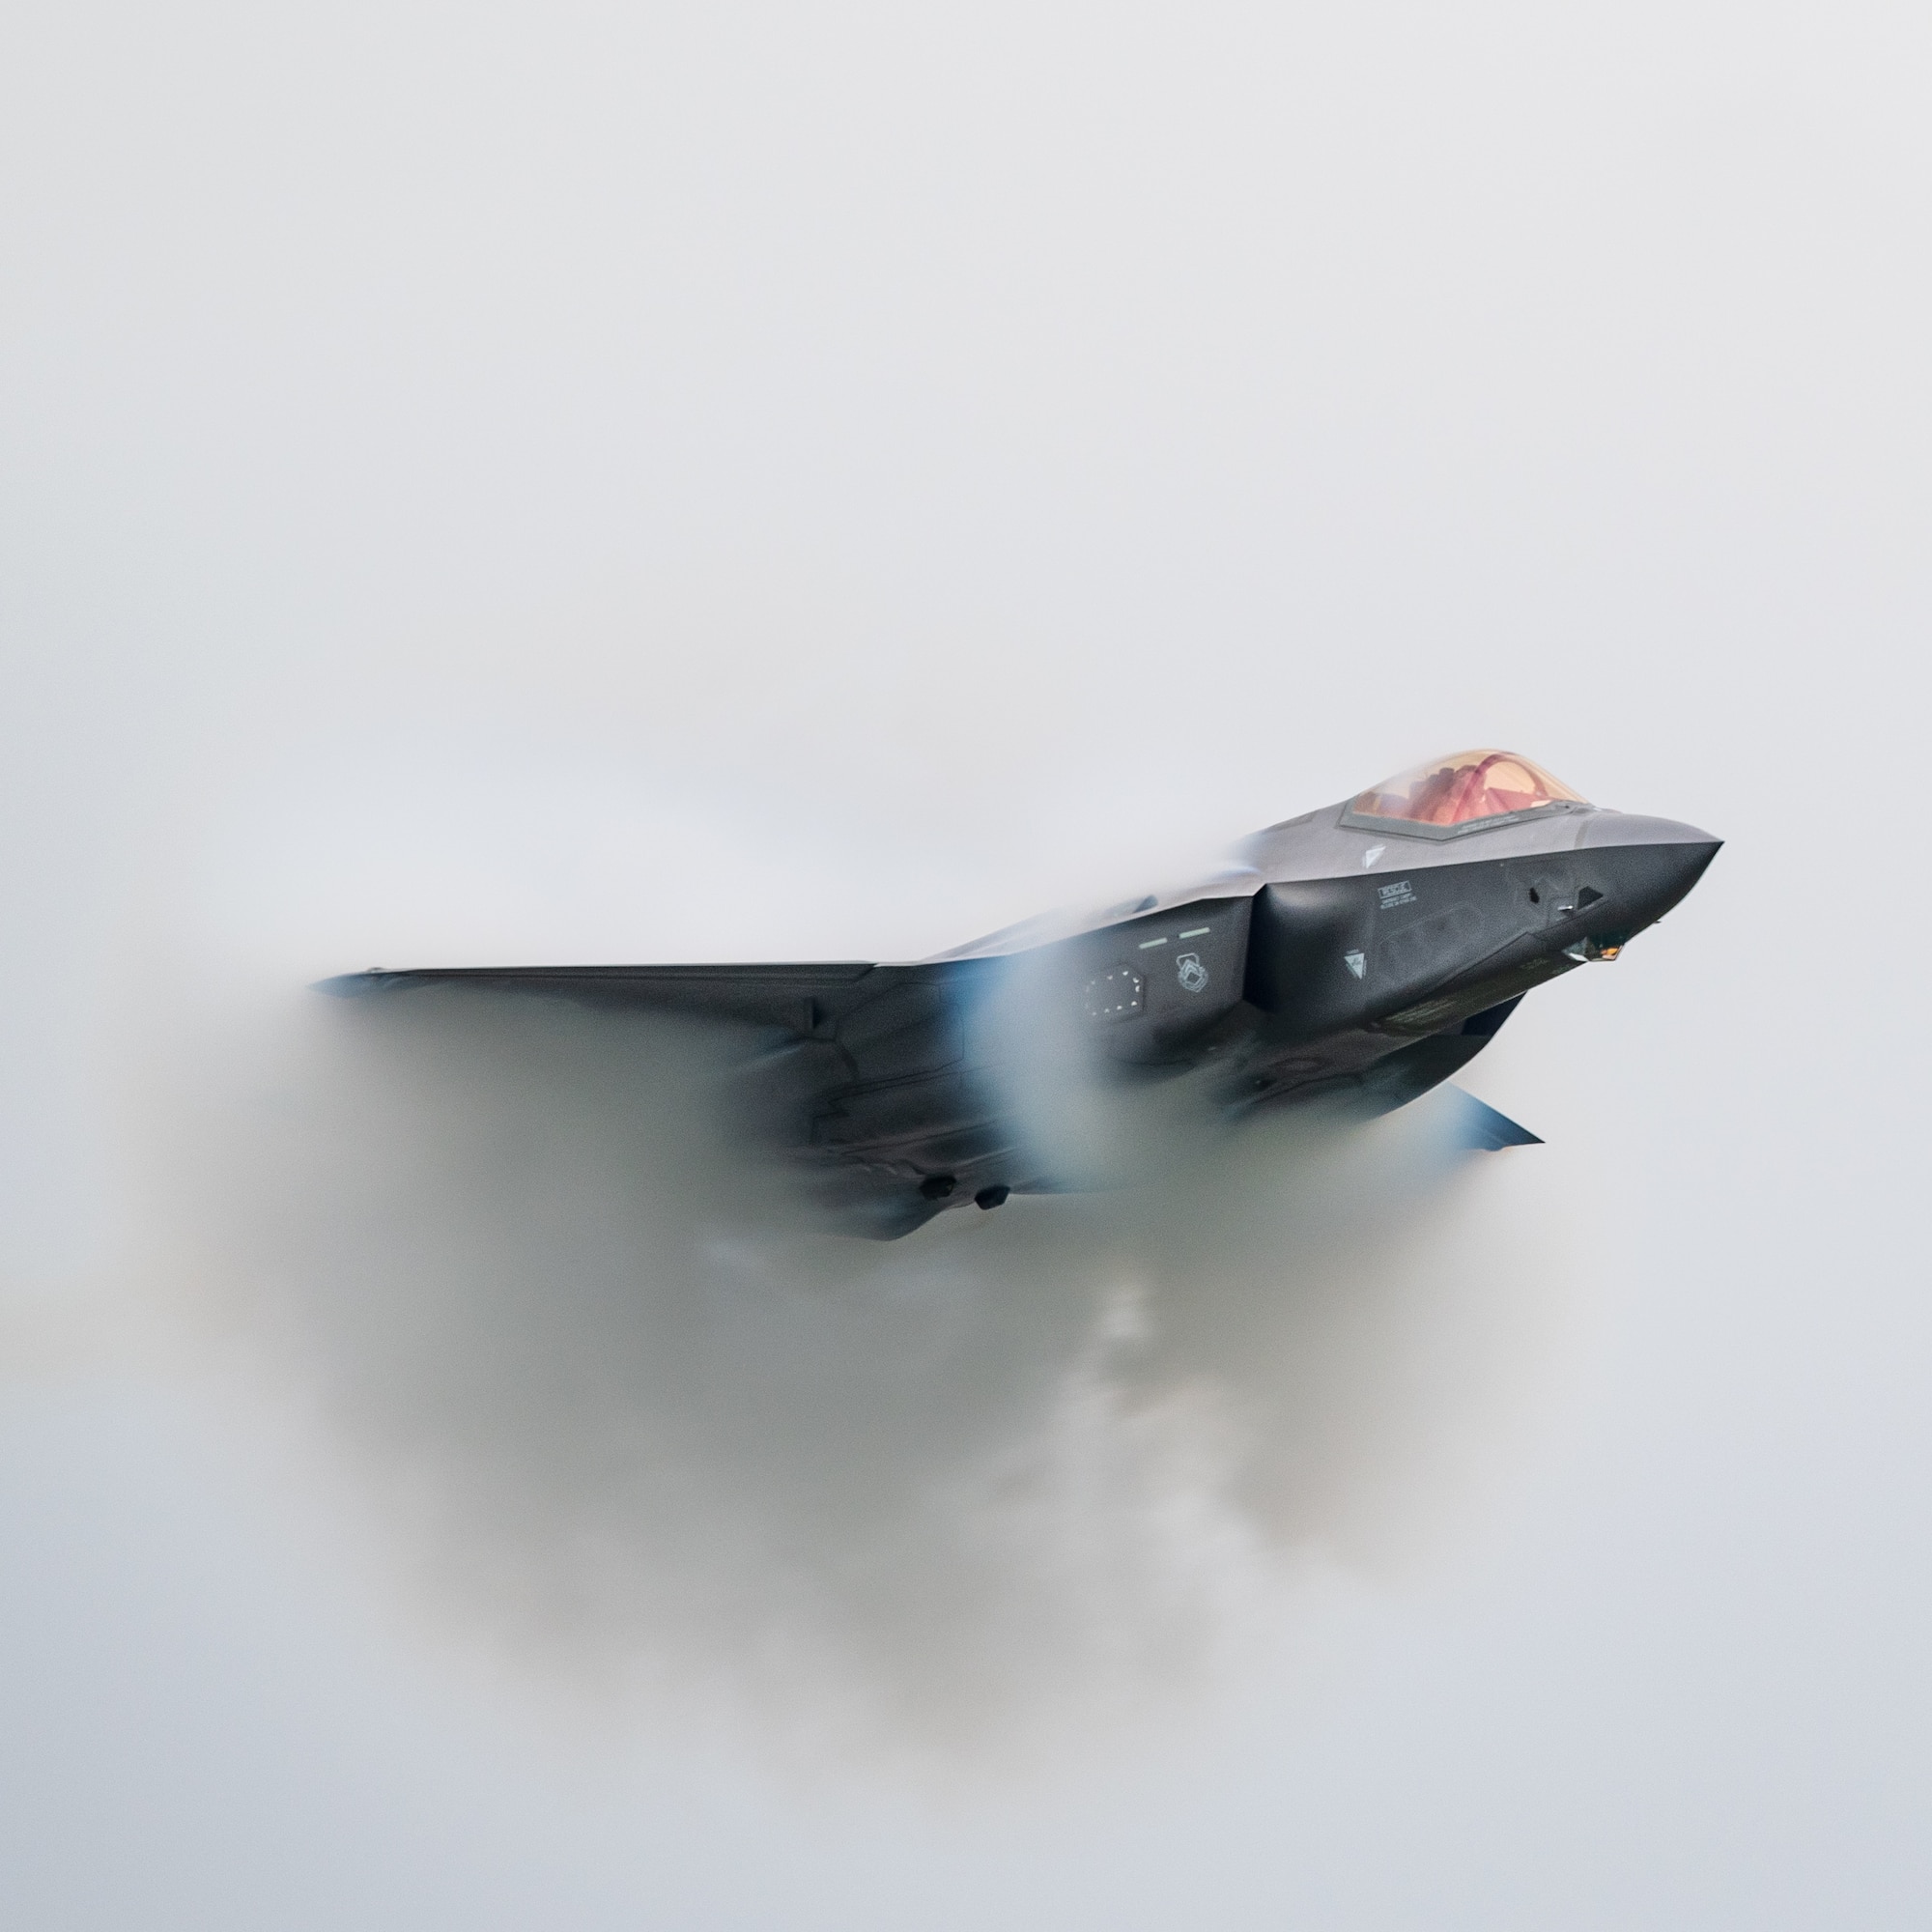 Capt. Andrew Olson, F-35 Lightning II demonstration team pilot and commander, performs aerial maneuvers during the Aero Gatineau-Ottawa Airshow in Gatineau, Quebec, Canada, Sept. 7, 2019. The demonstration team consists of 10 Airmen who showcase the world’s most technologically advanced fifth-generation fighter jet. (U.S. Air Force photo by Senior Airman Alexander Cook)